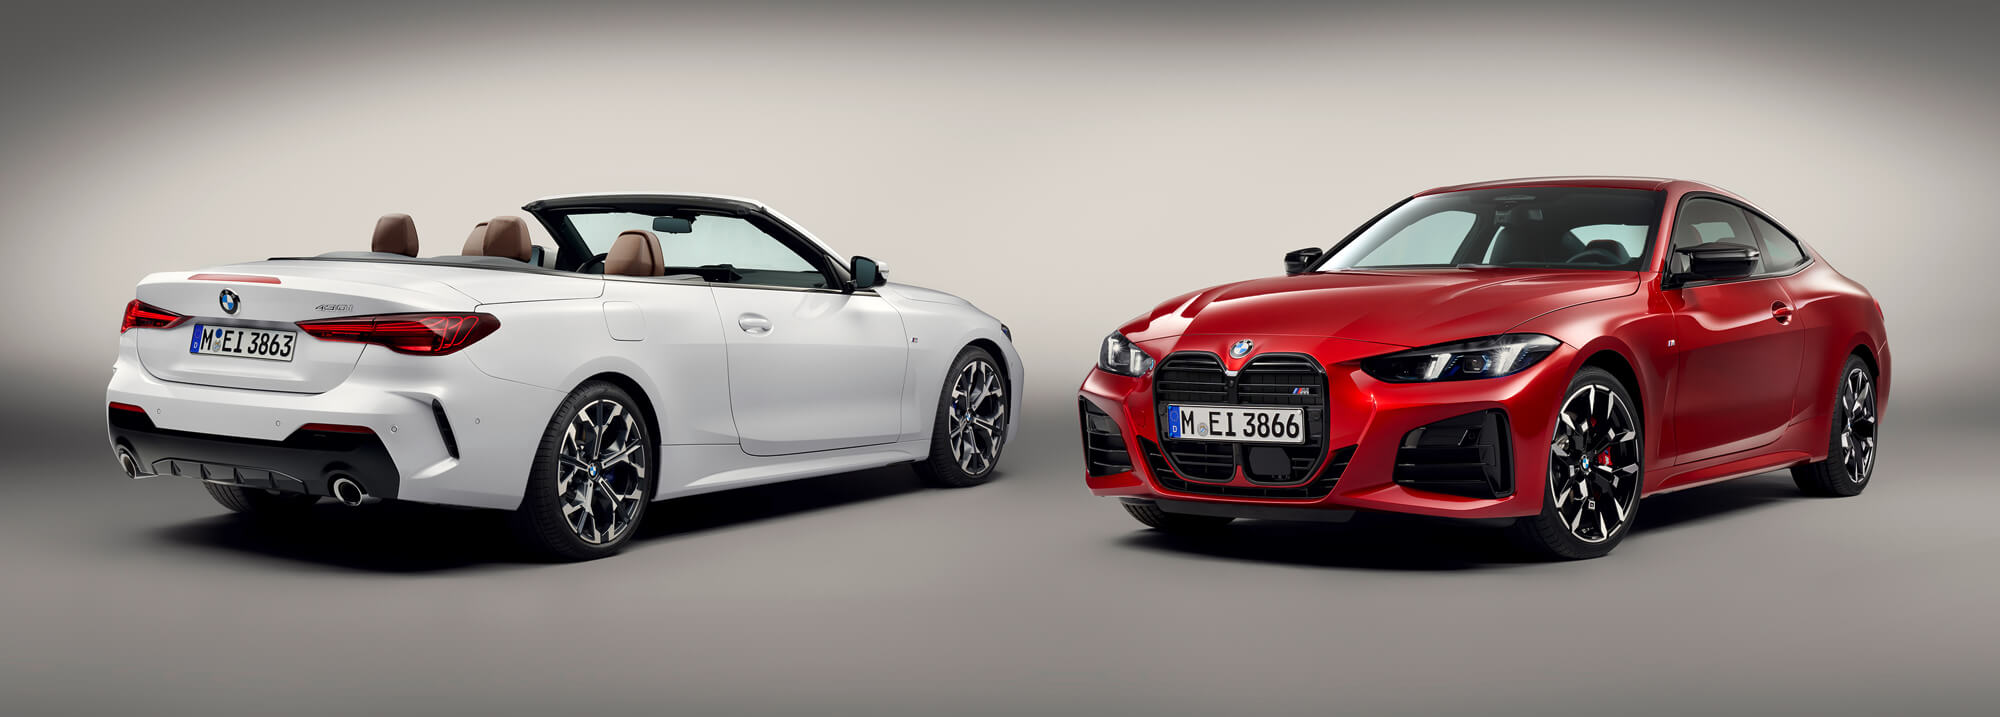 BMW launches new 4 Series Coupe and Convertible video-banner